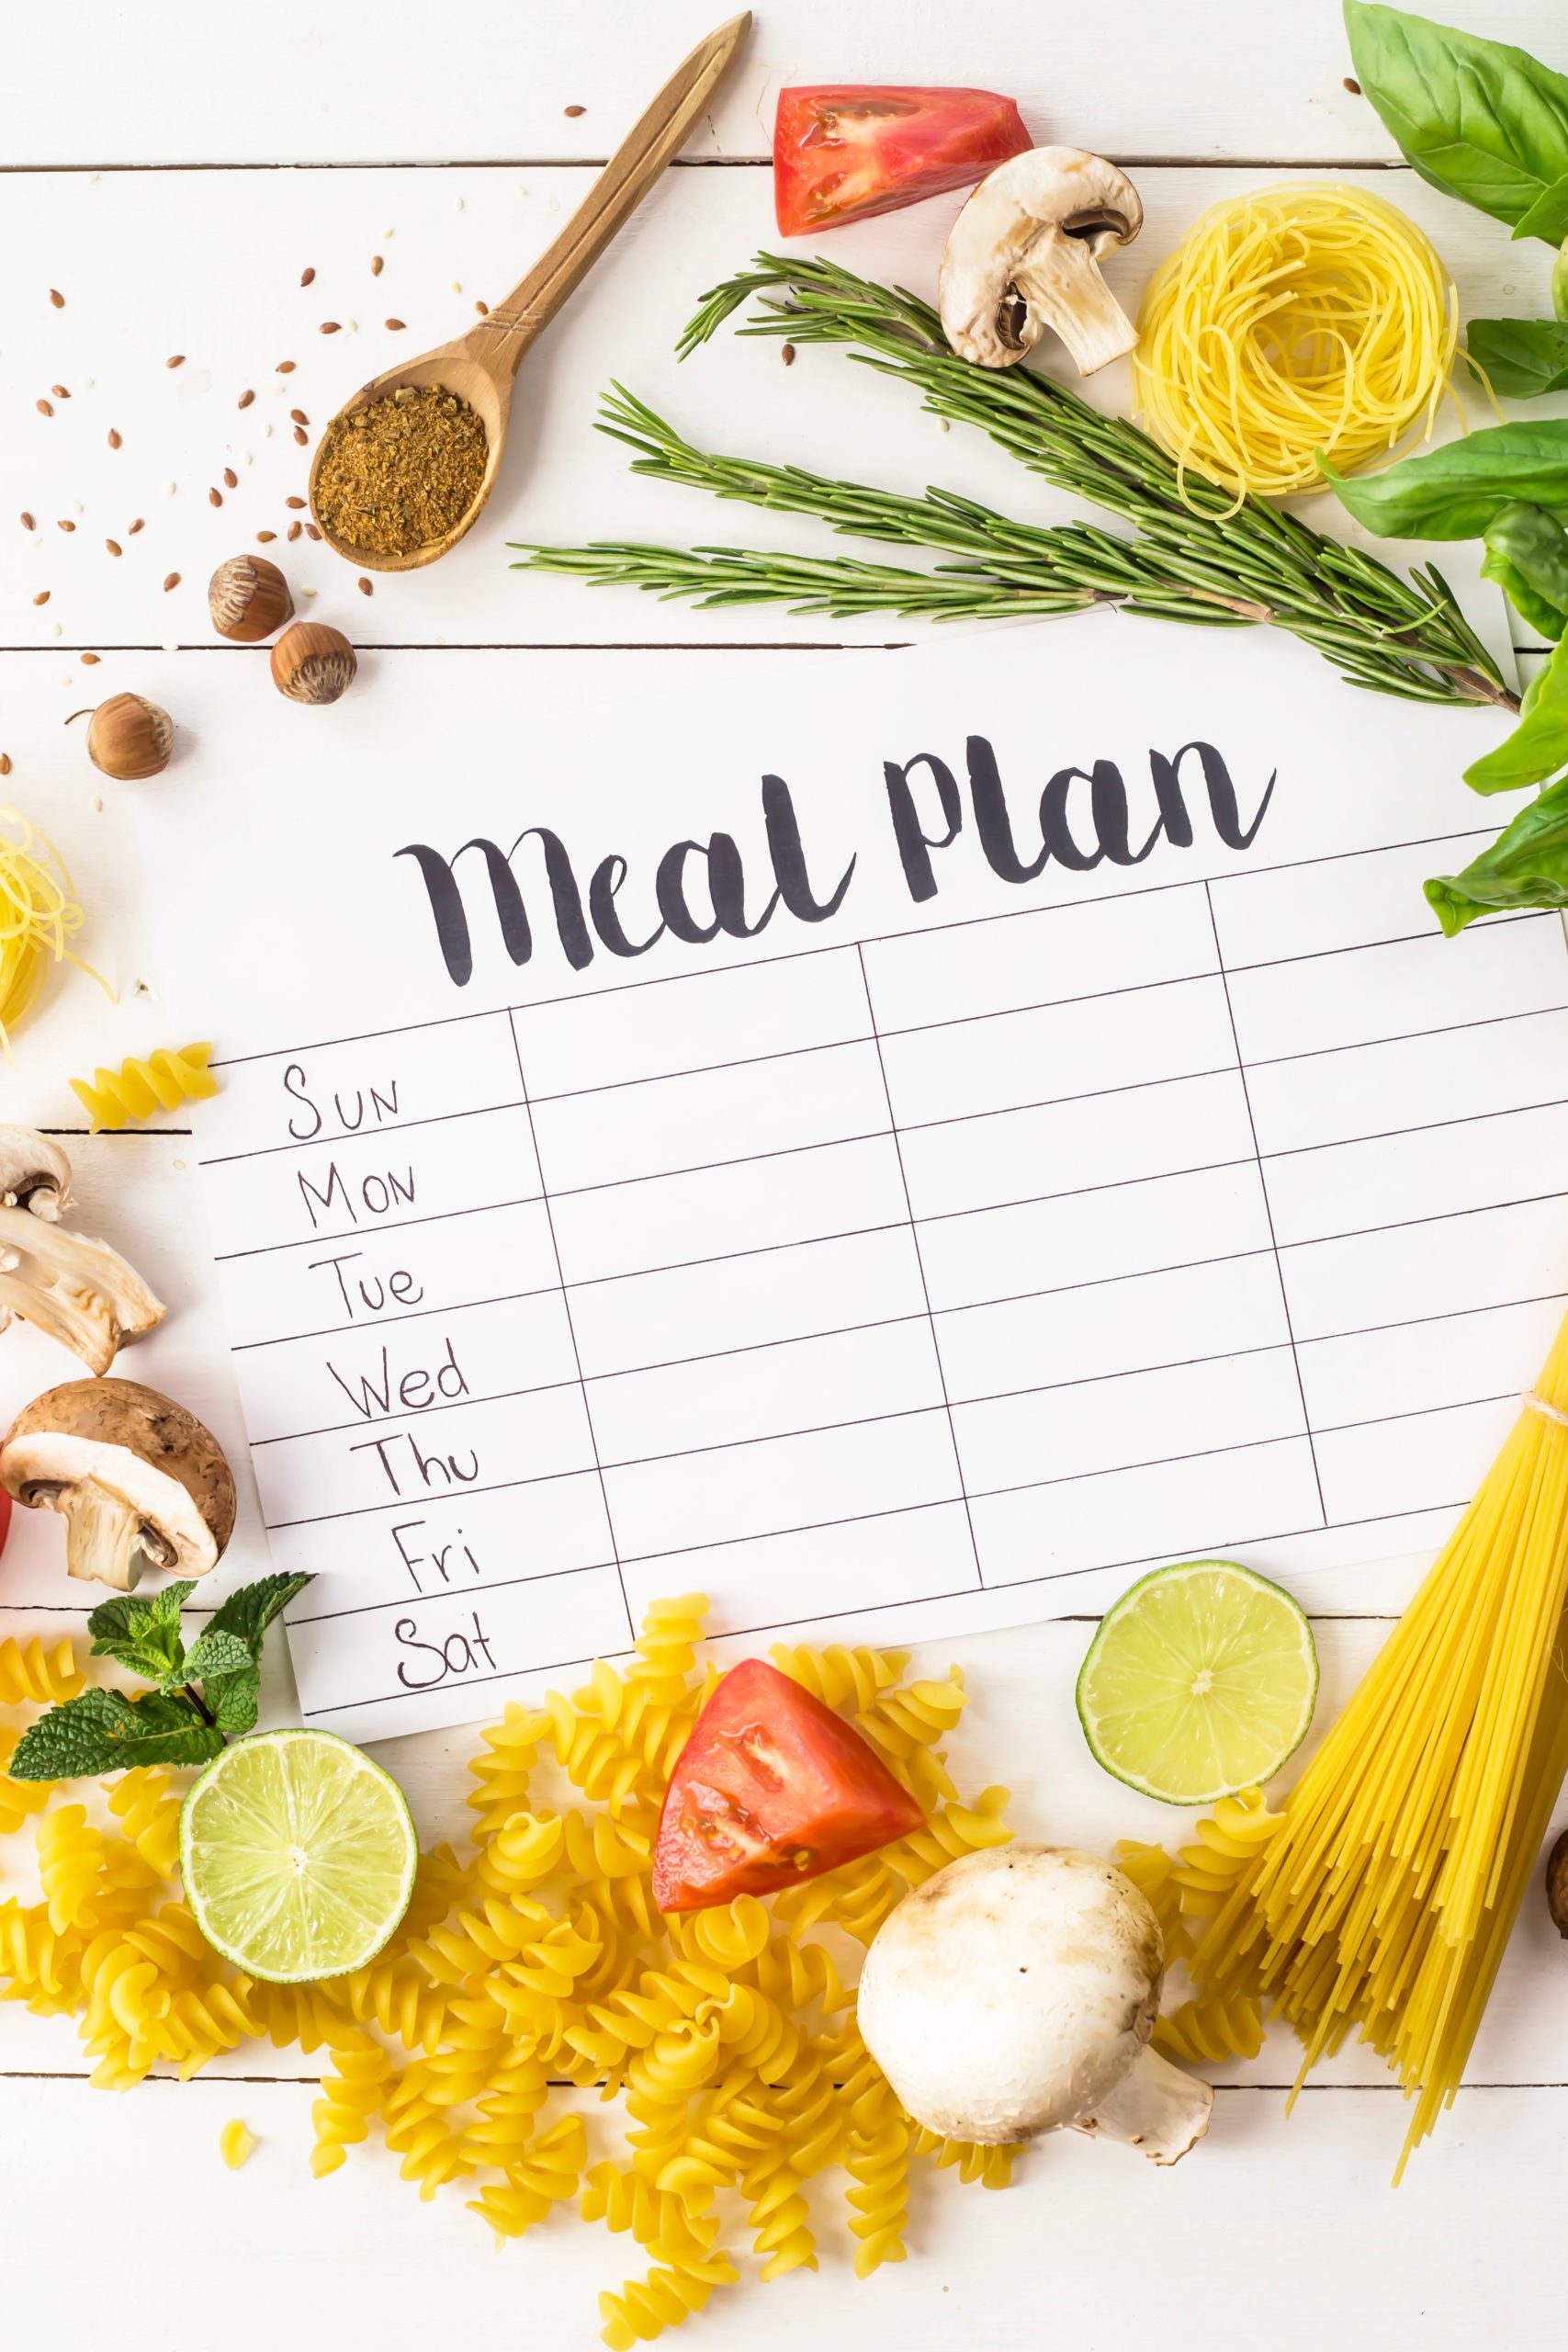 Meal planning list surrounded by dried pasta and vegetables